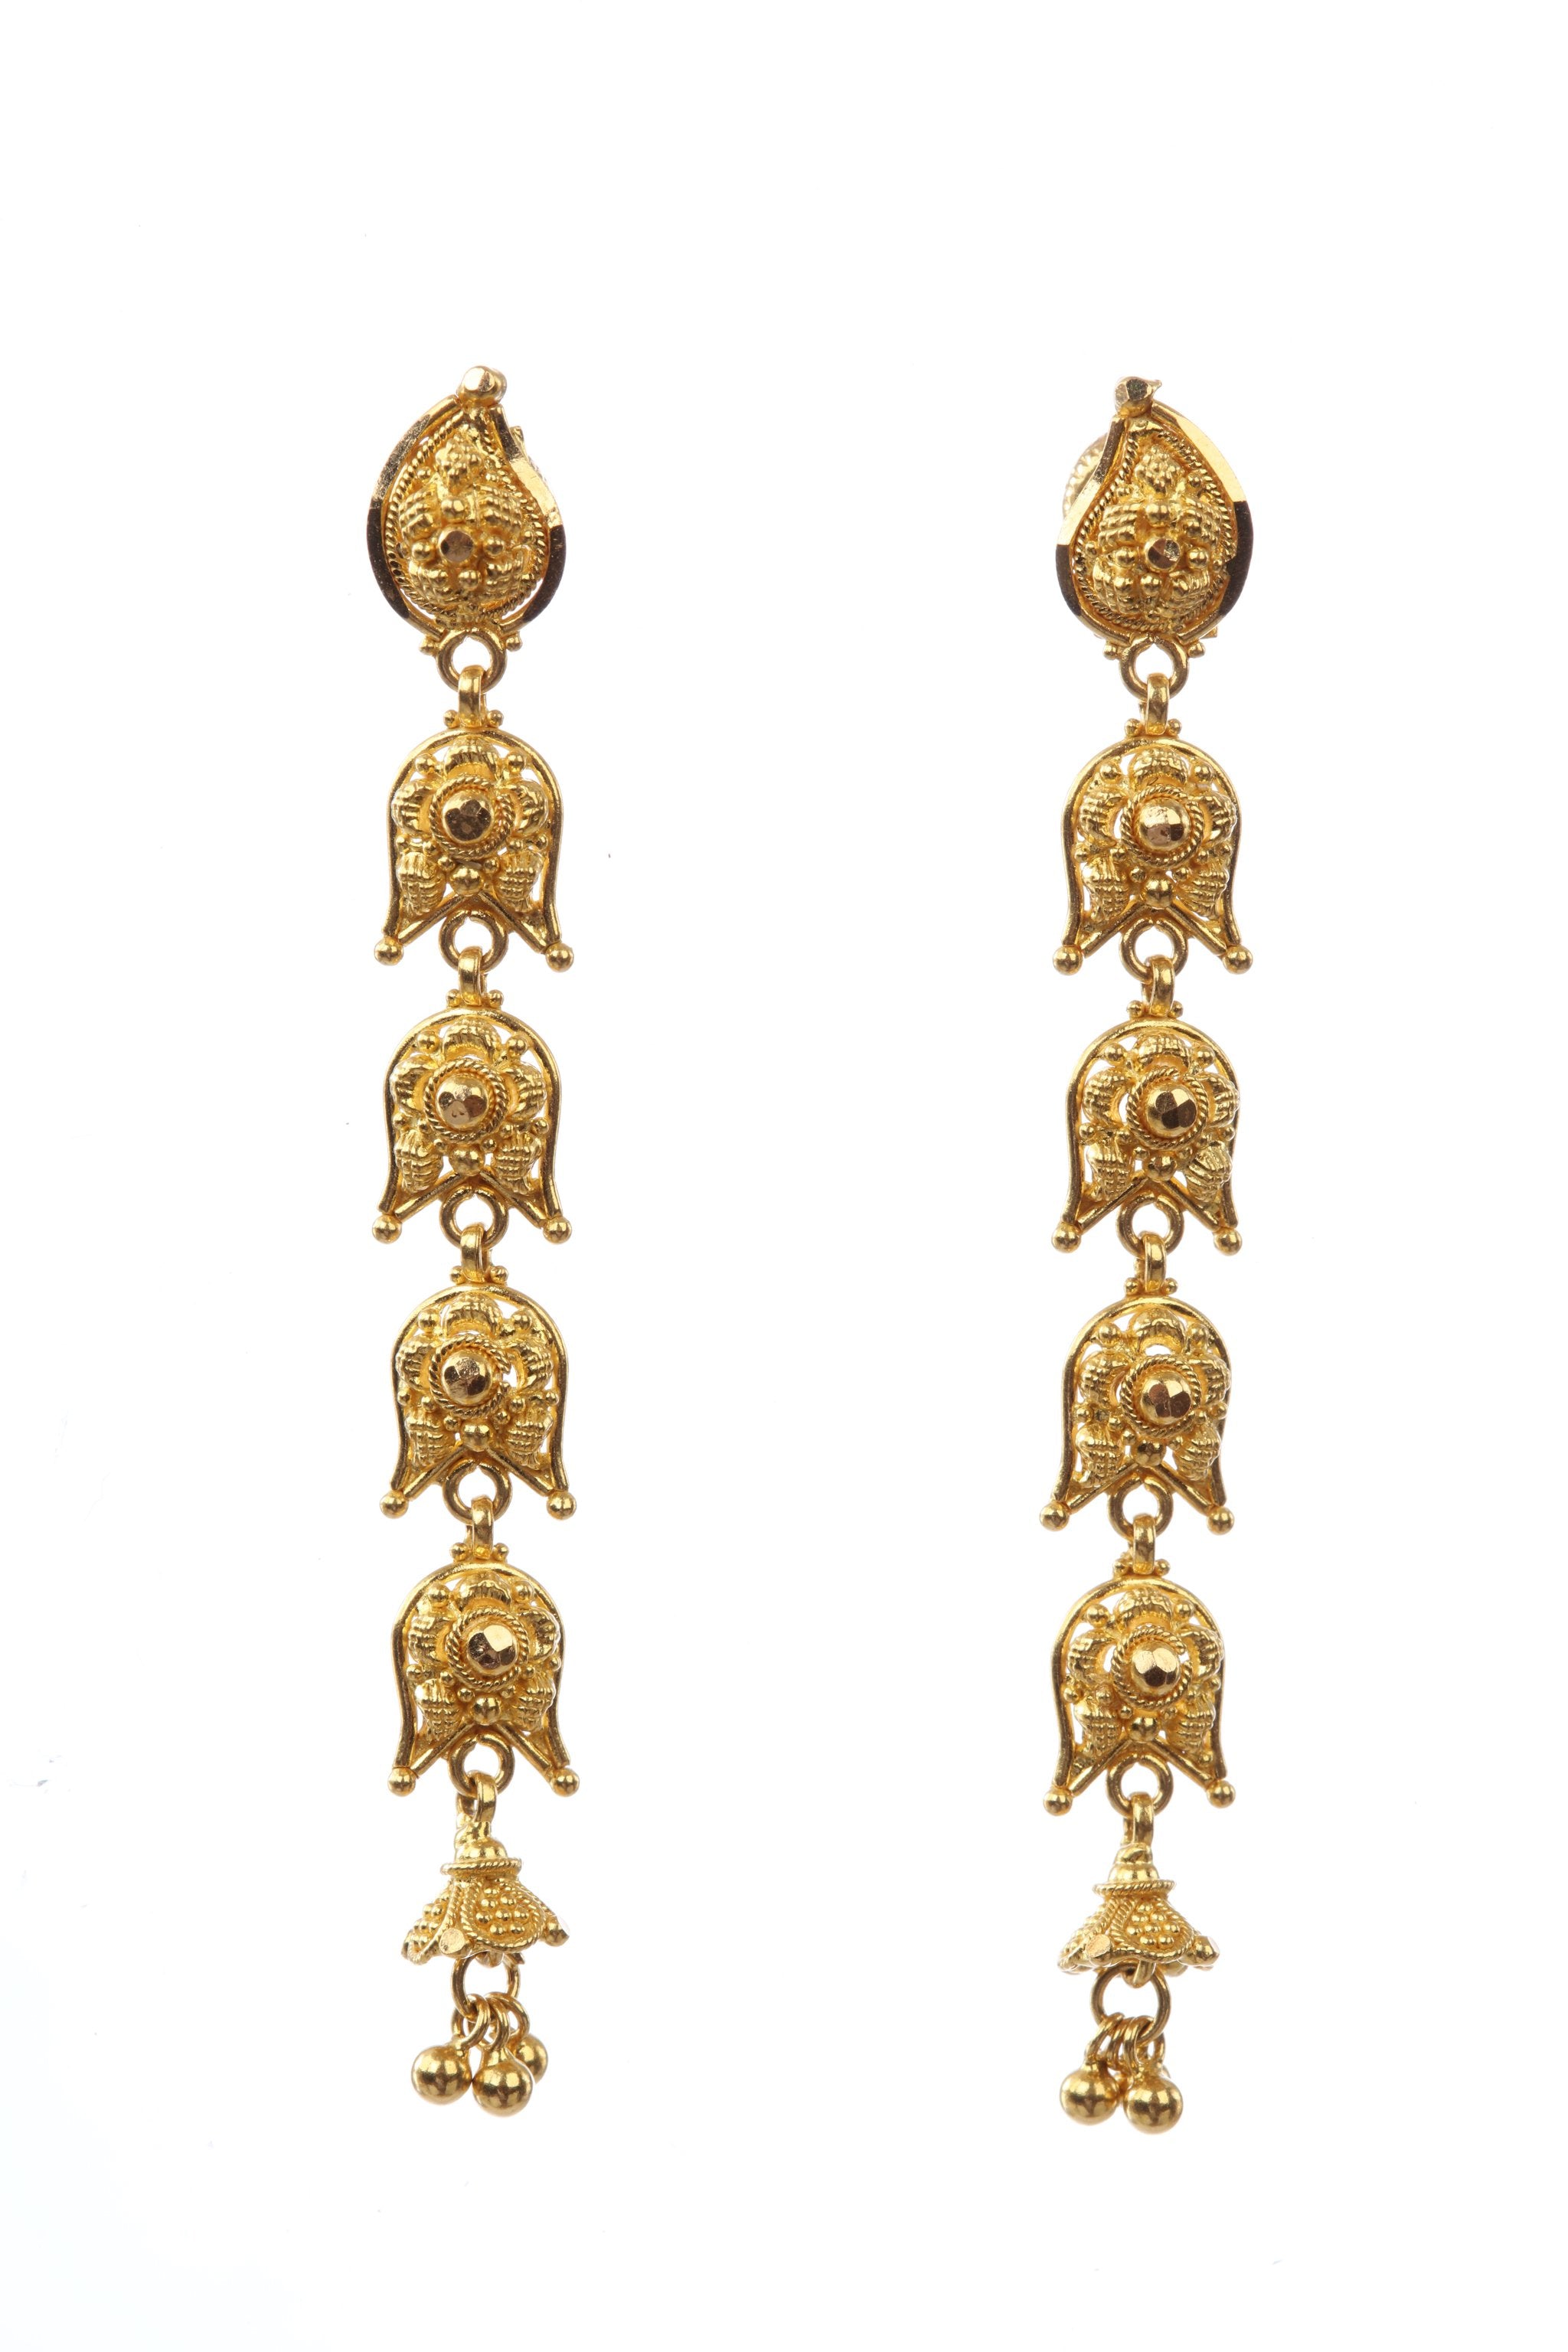 Details more than 253 gold traditional earrings designs latest